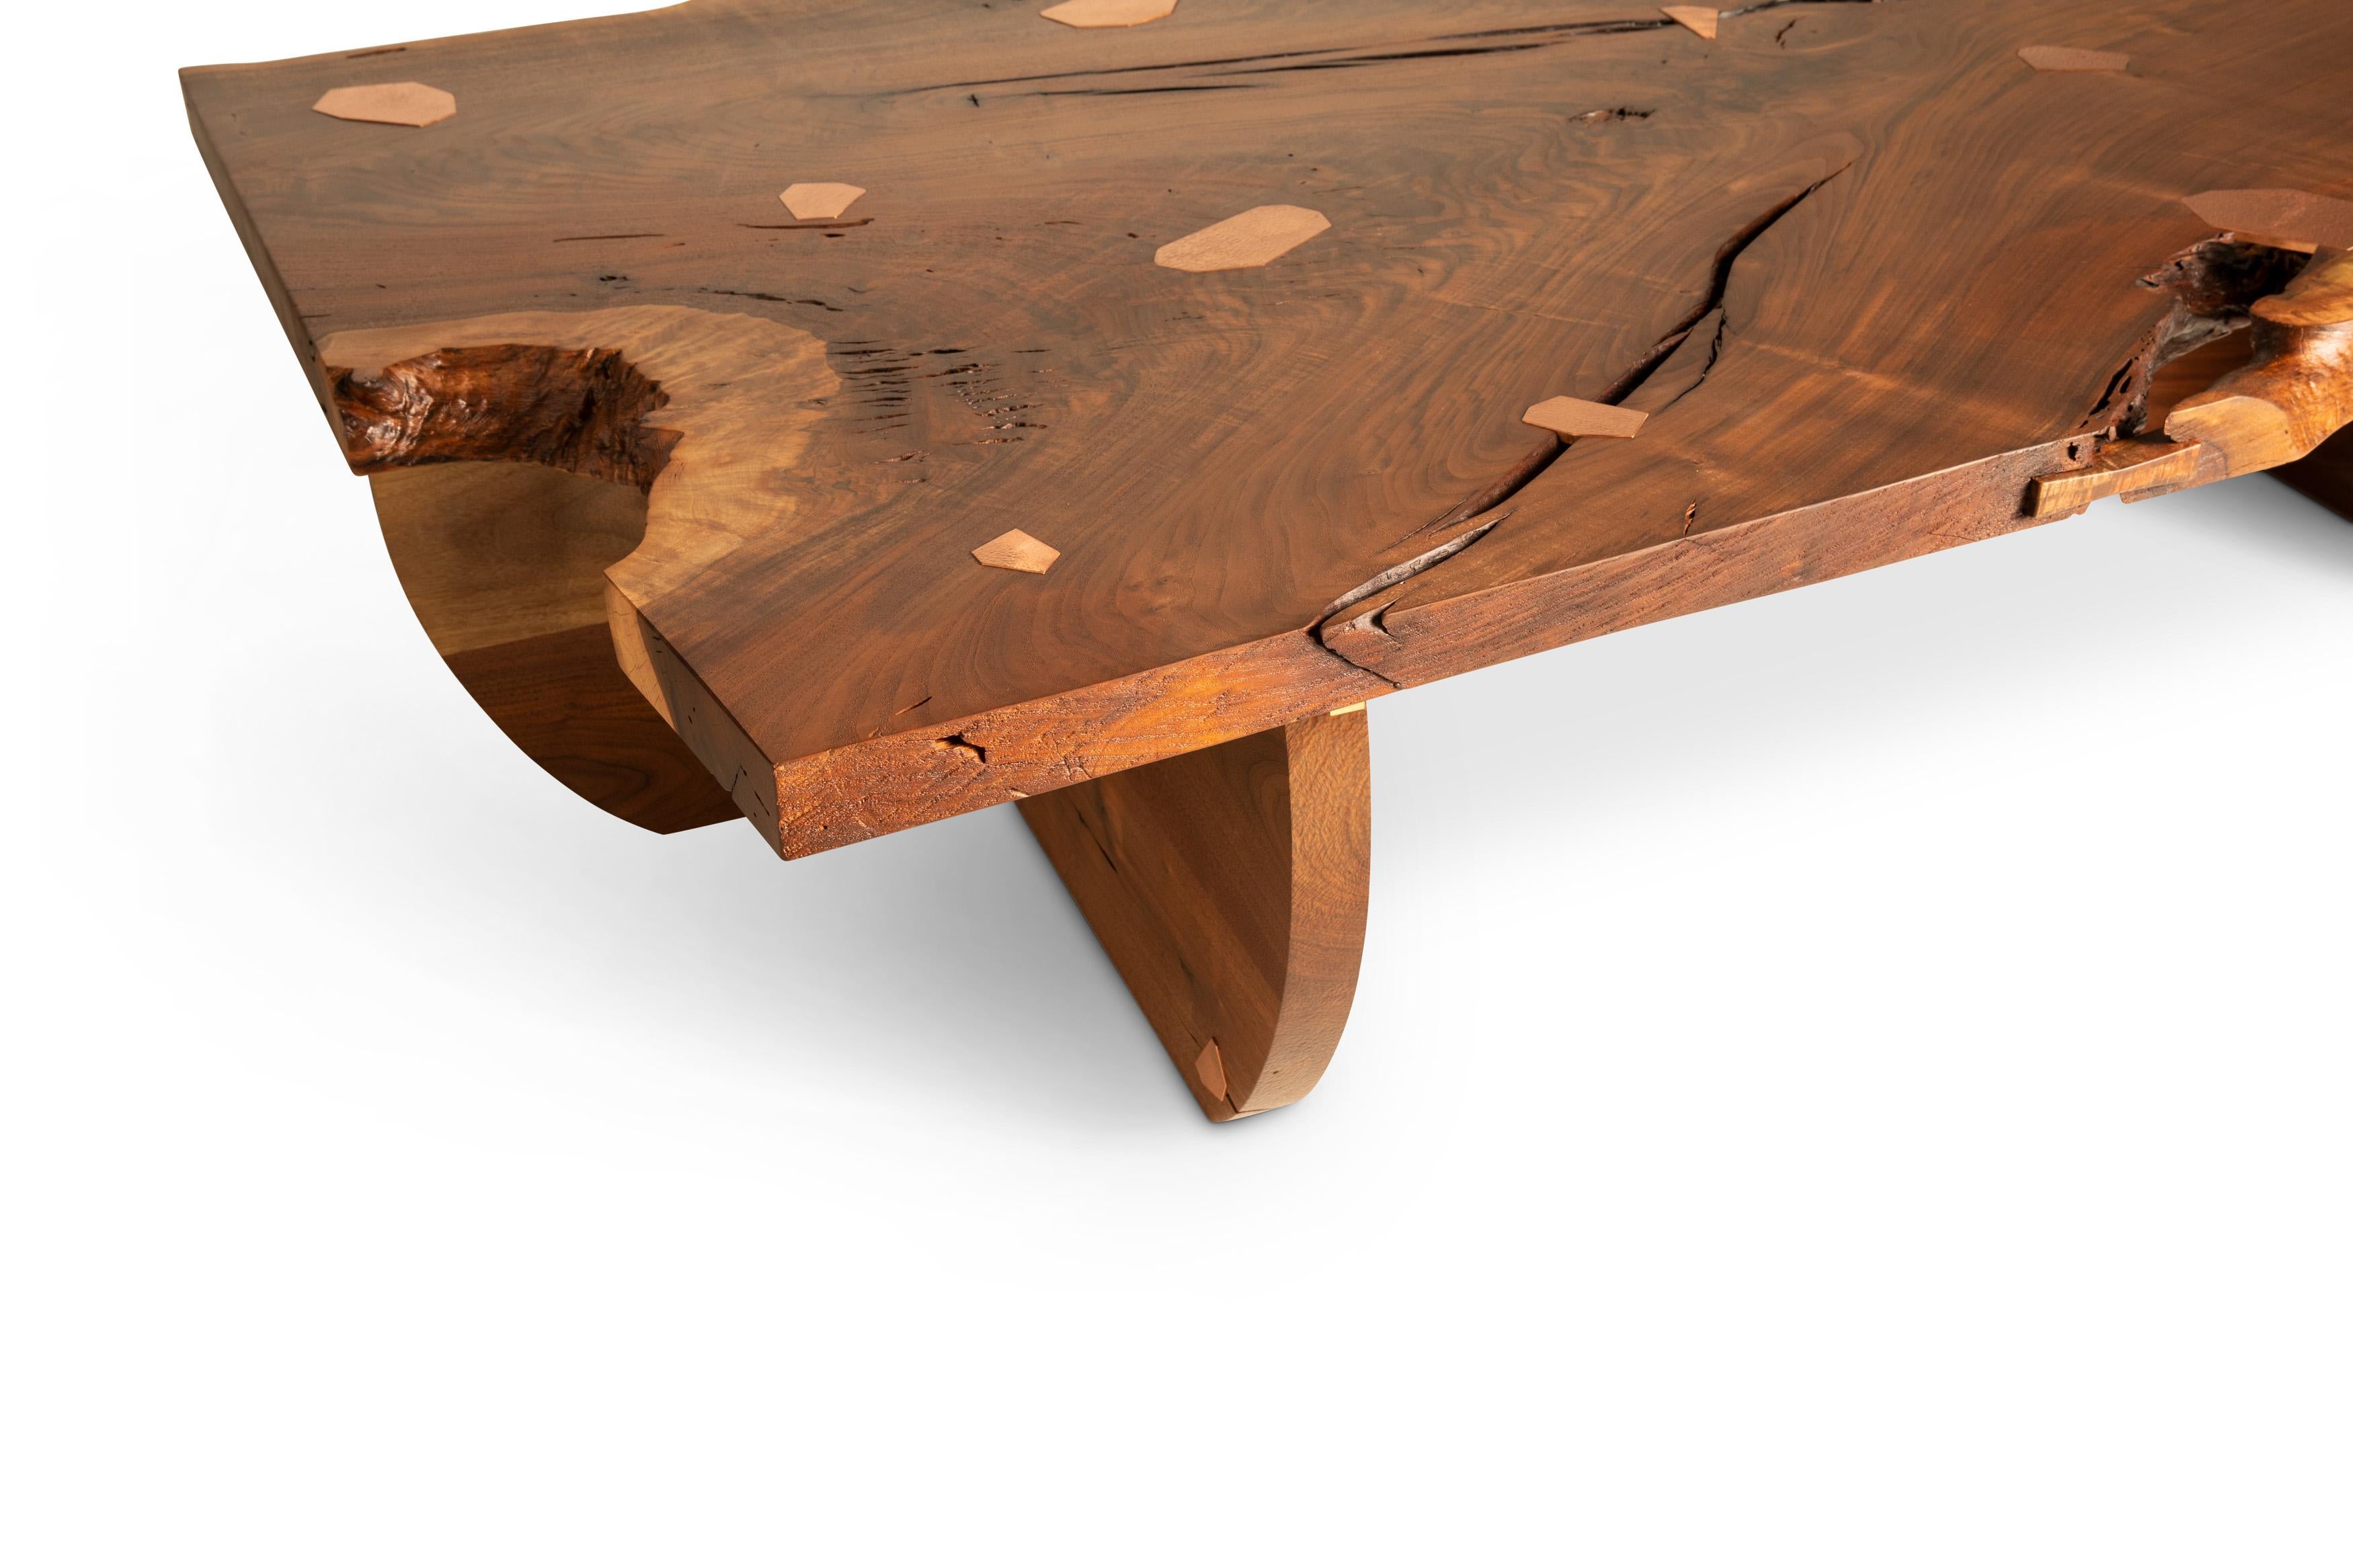 Organic Modern Geode Table 002 in Claro and Black Walnut with Copper Inlays For Sale